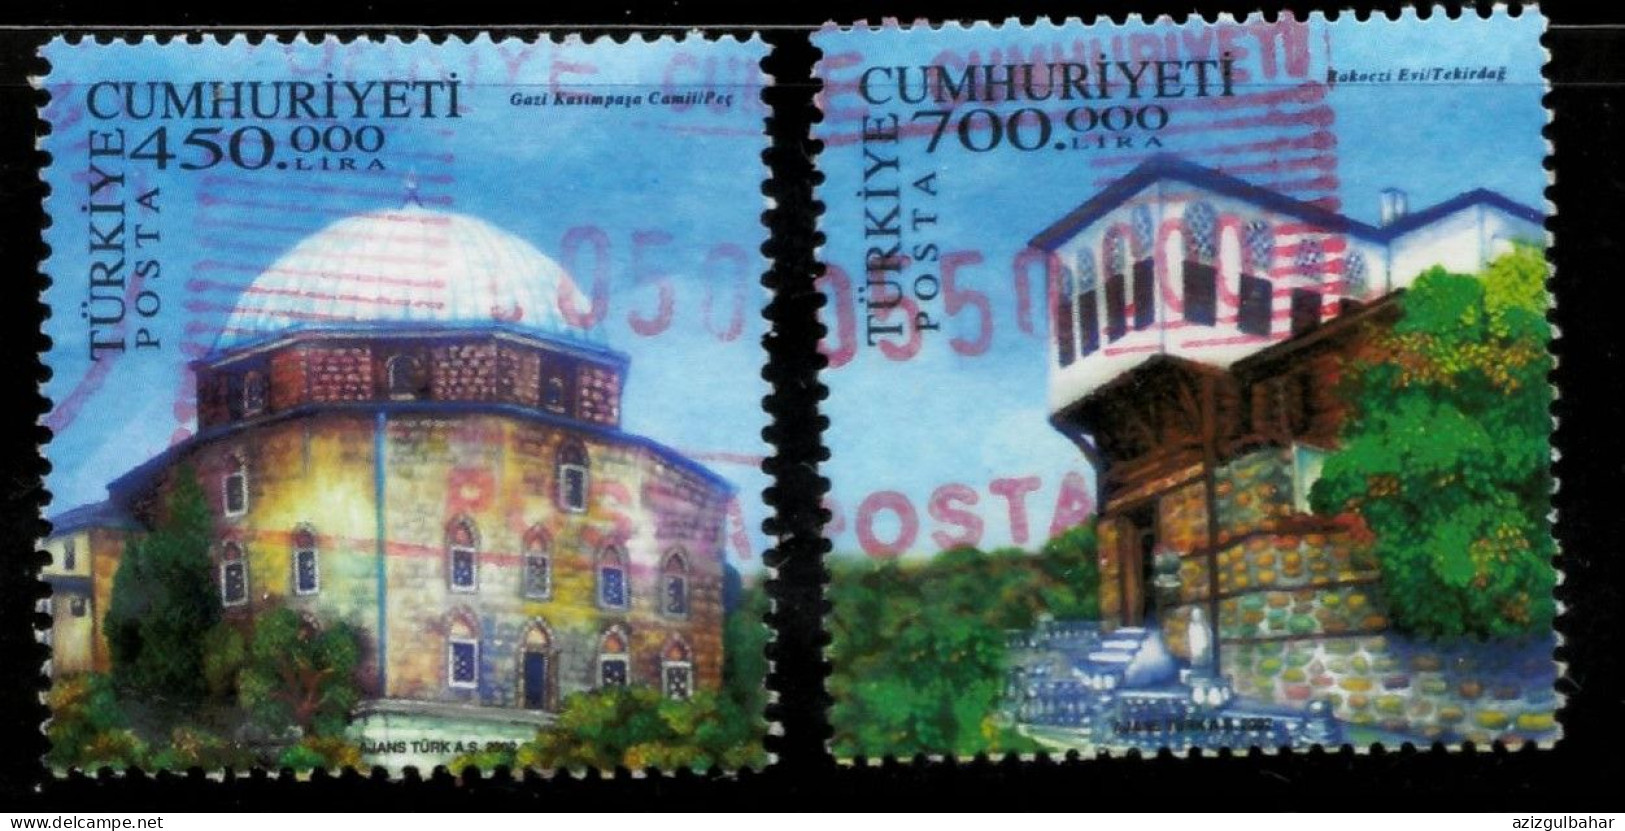 TURKEY 2002 -  USED - CULTURAL HERITAGE - Used Stamps